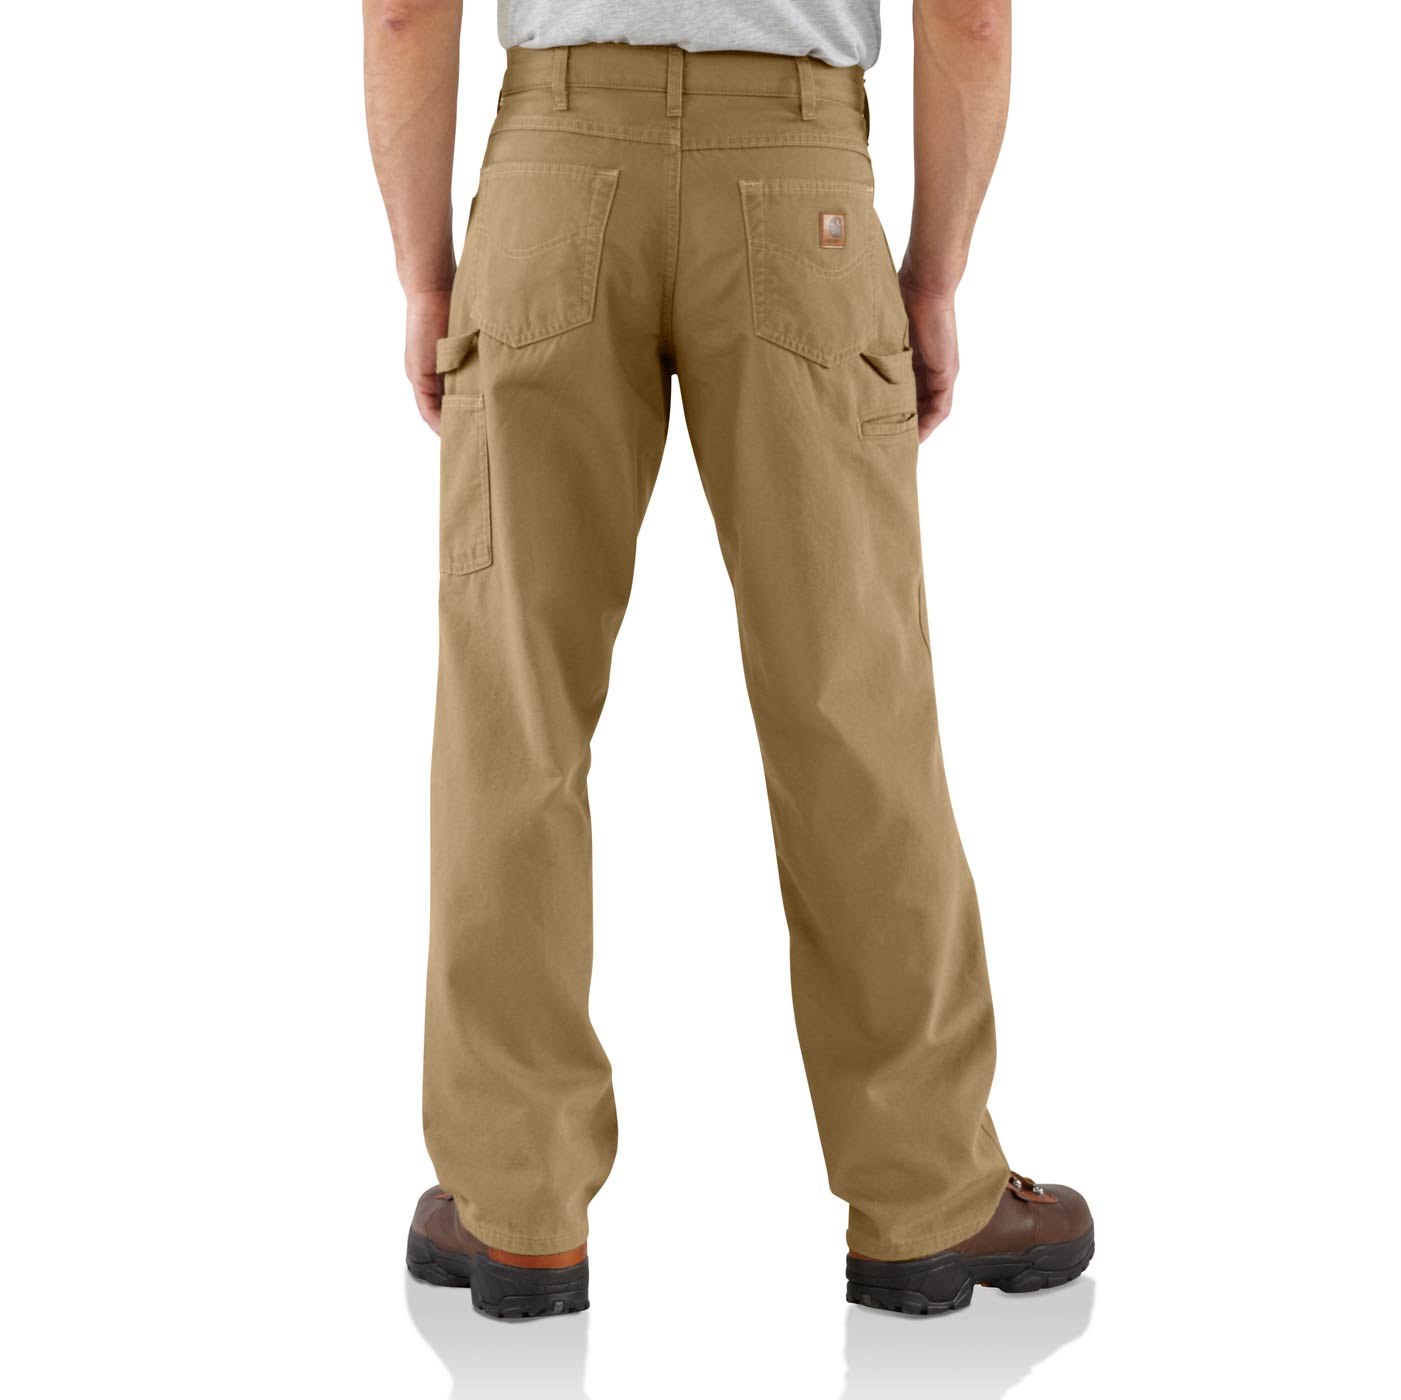 Carhartt Insulated Pants and More… - Begin Prepping Now!!